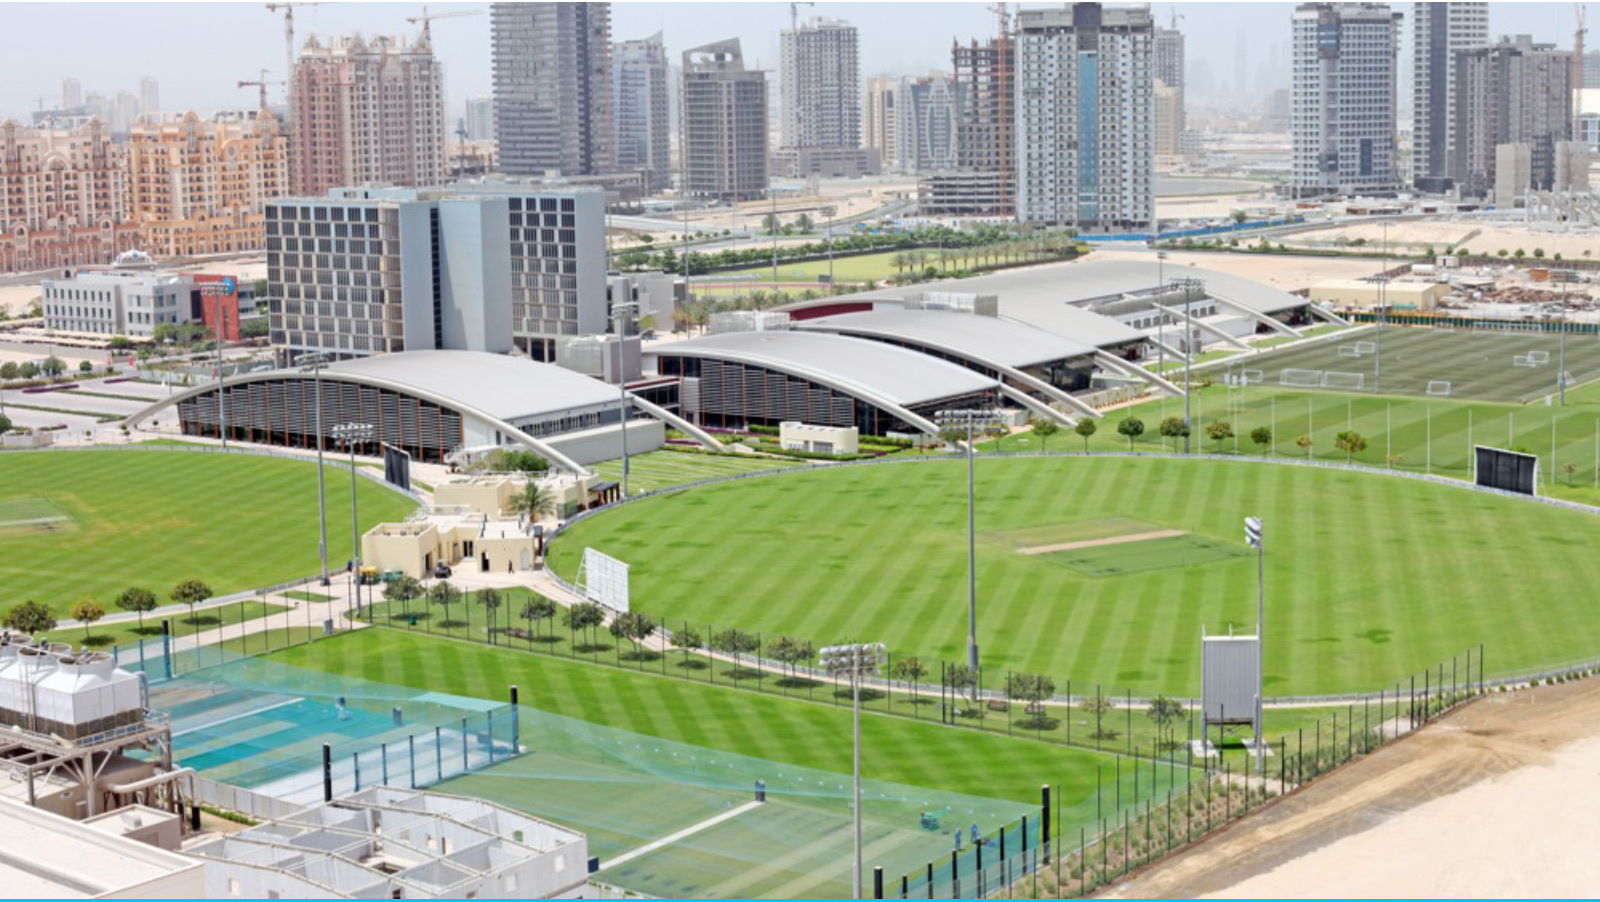 An aerial view of the cricket grounds at ICC cricket academy